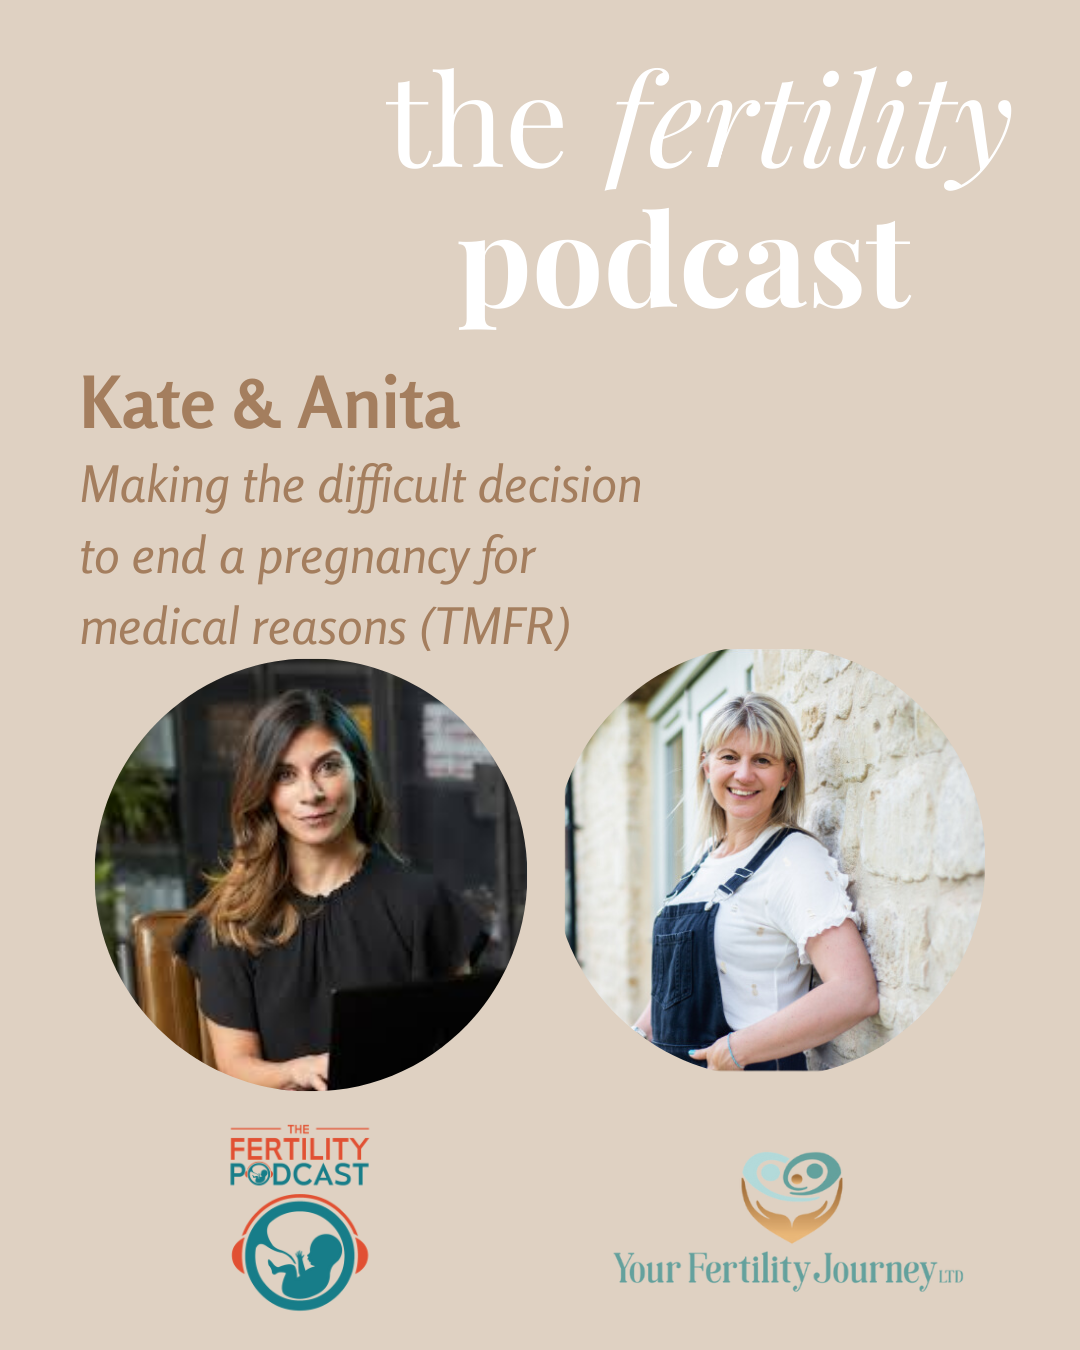 Anita – Making the difficult decision to end a pregnancy for medical reasons (TMFR)